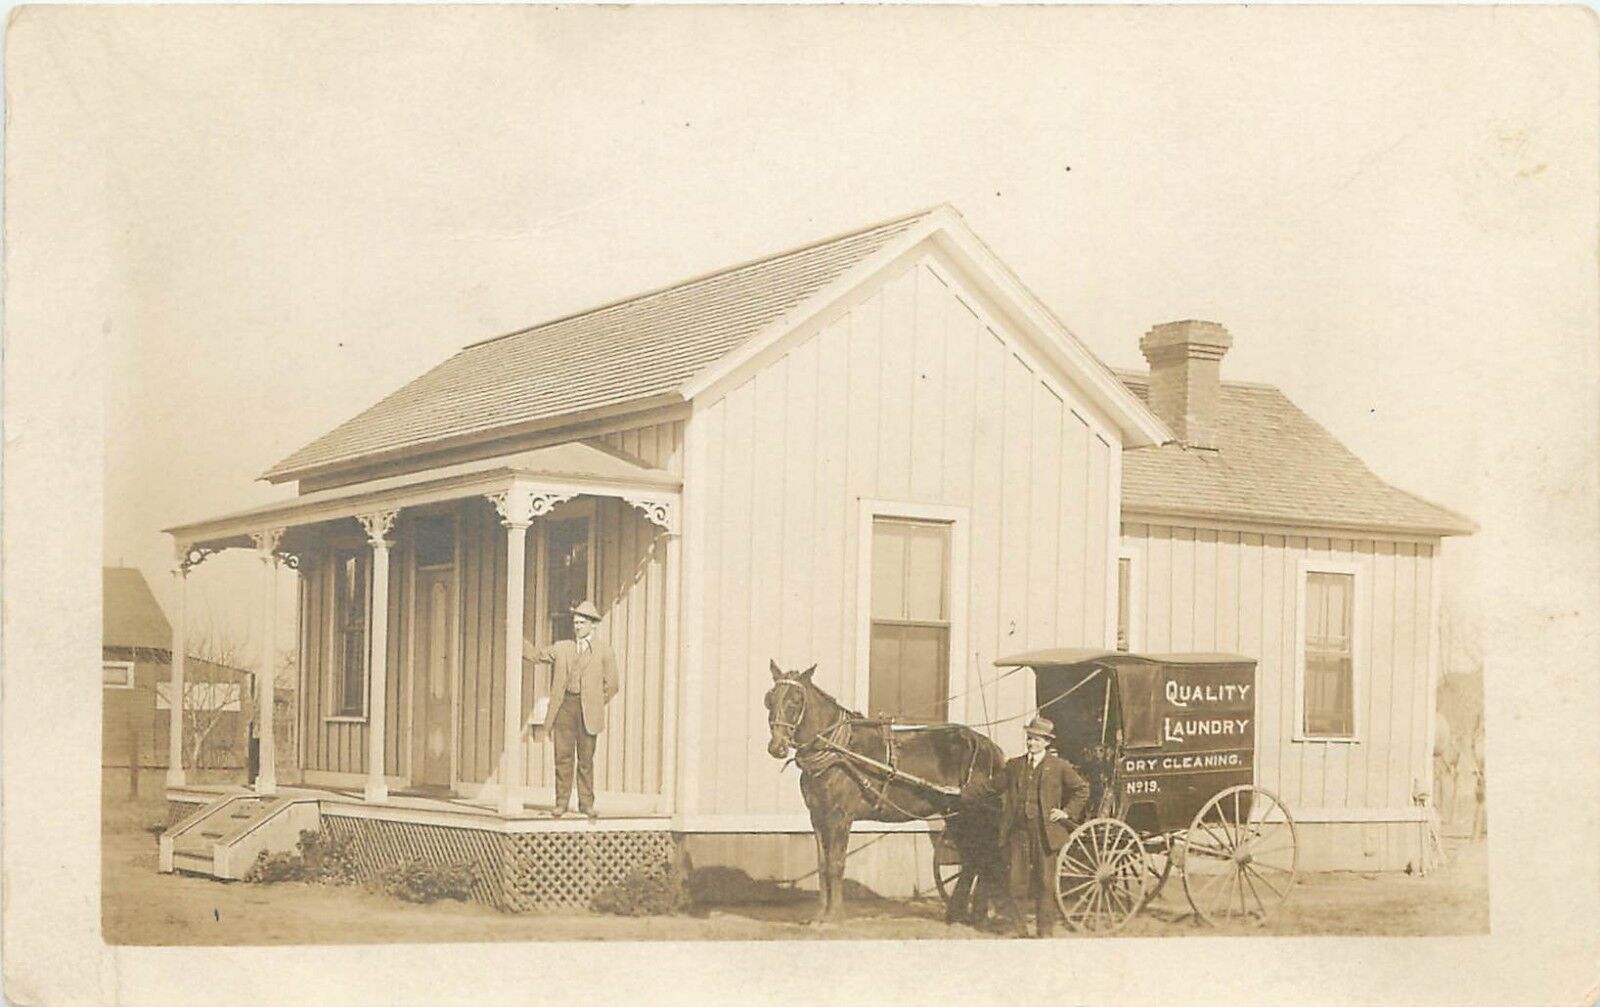 c1907 RPPC Horsedrawn Wagon Quality Laundry & Dry Cleaners, probably Los Angeles